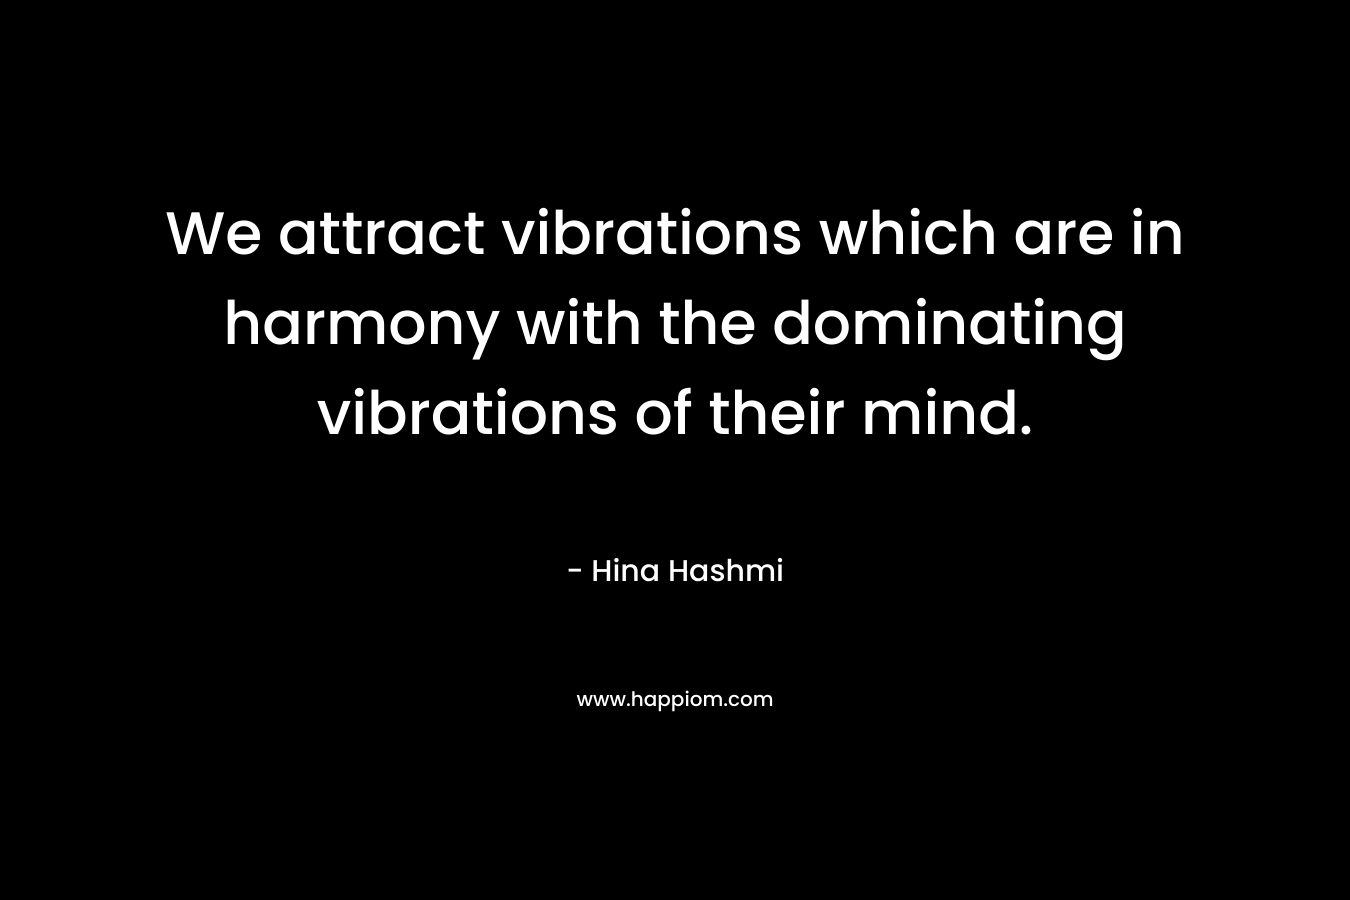 We attract vibrations which are in harmony with the dominating vibrations of their mind. – Hina Hashmi